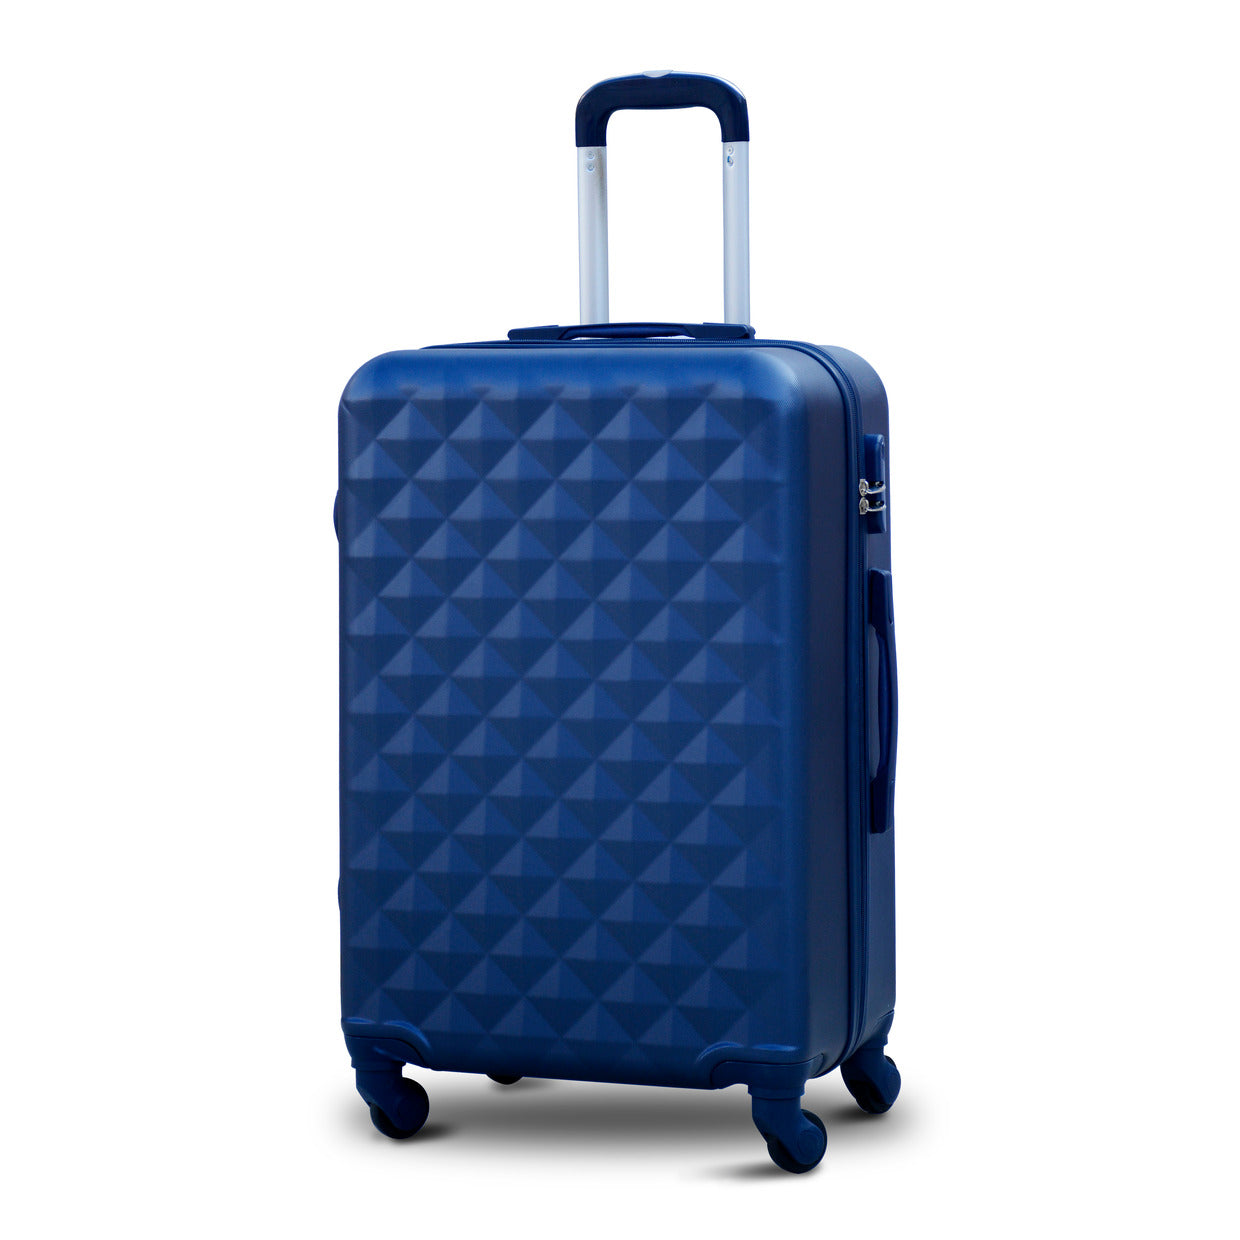 28" Diamond Cut ABS Lightweight Luggage Bag With Spinner Wheel